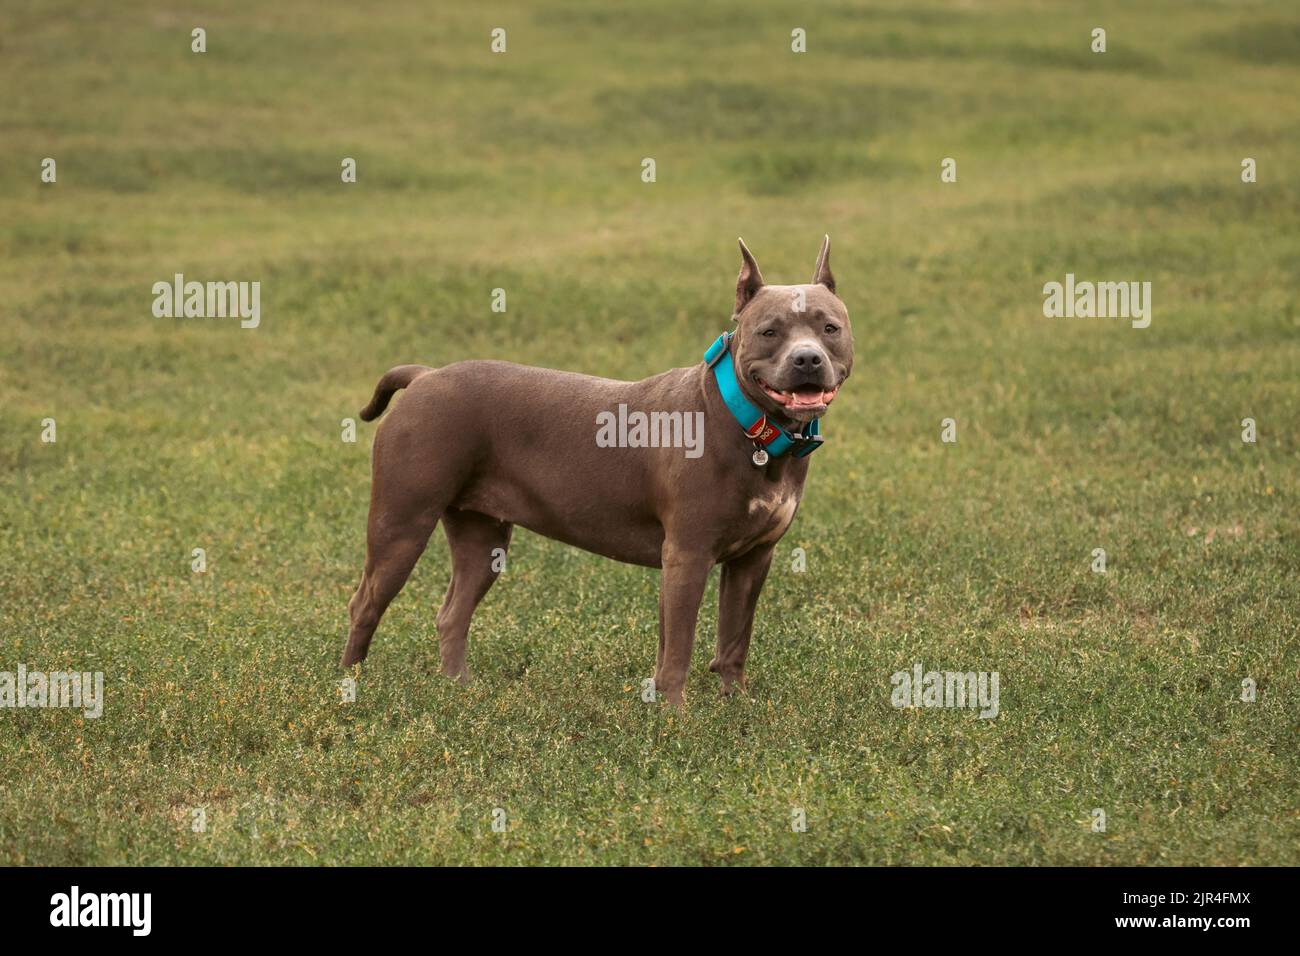 American pit bull. Thoroughbred dog. A breed for experienced dog breeders. A reliable defender of the house. Stock Photo